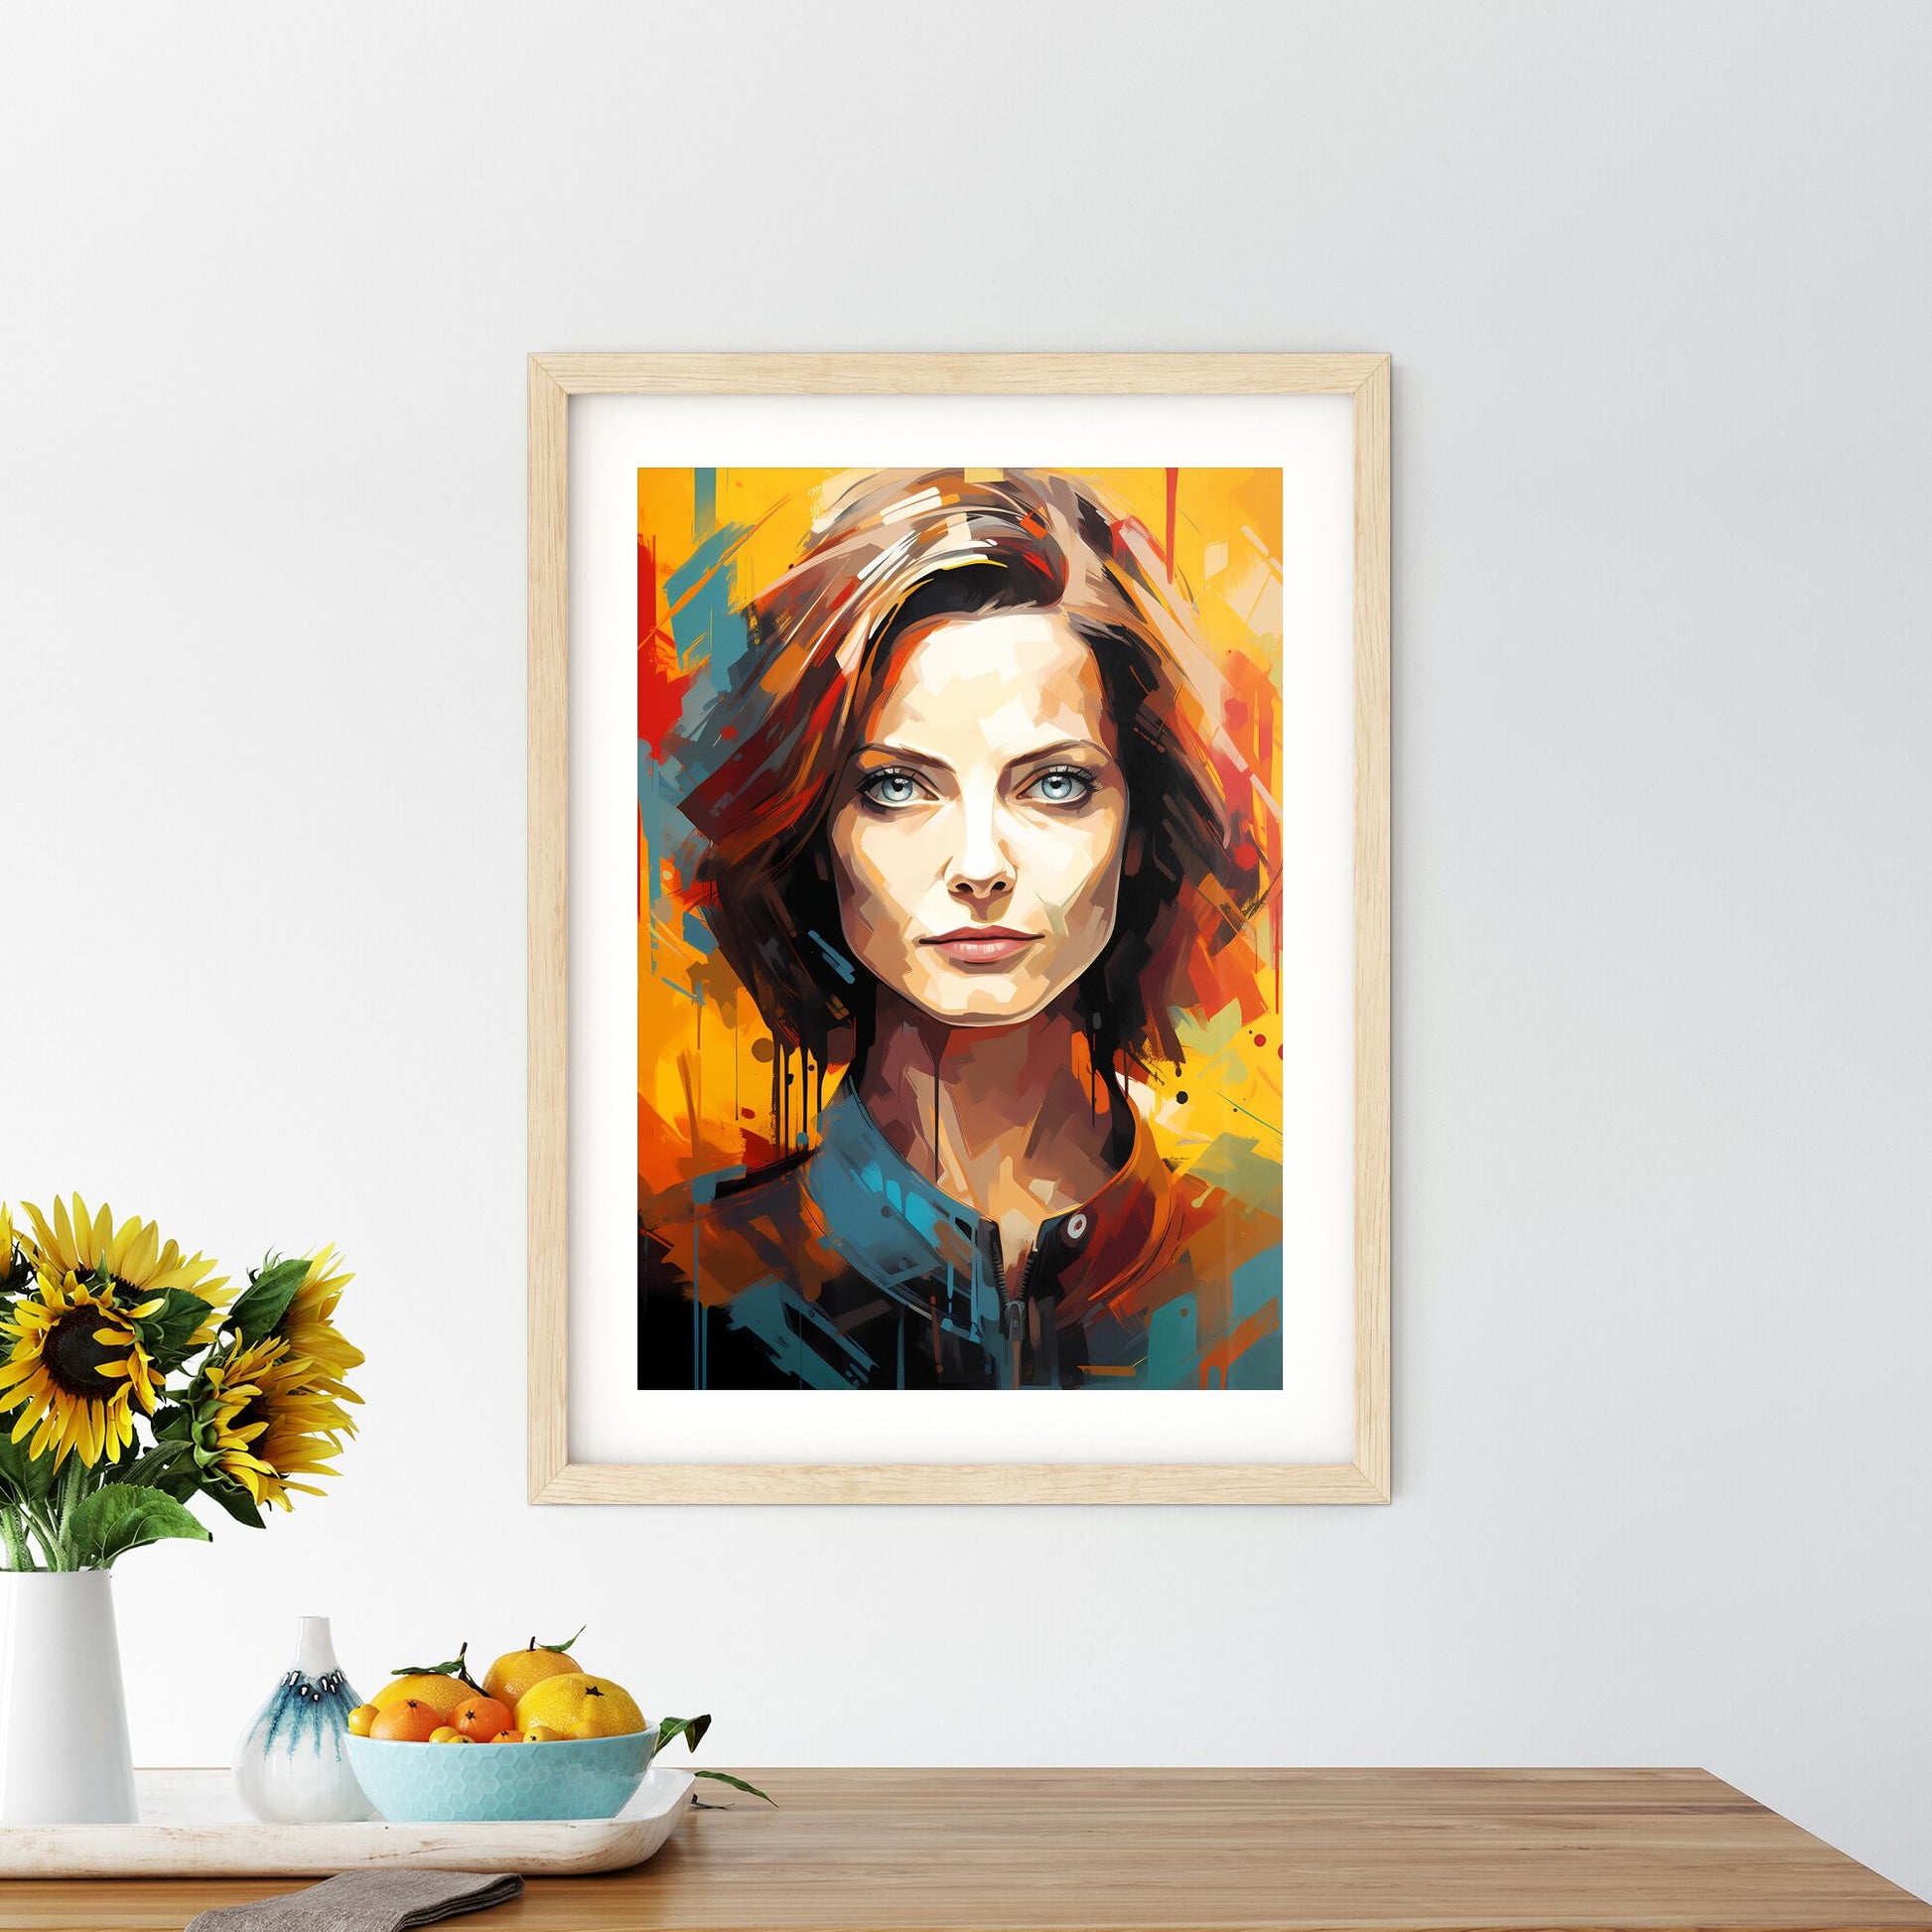 Clarice Starling Jodie Foster - A Painting Of A Woman Default Title